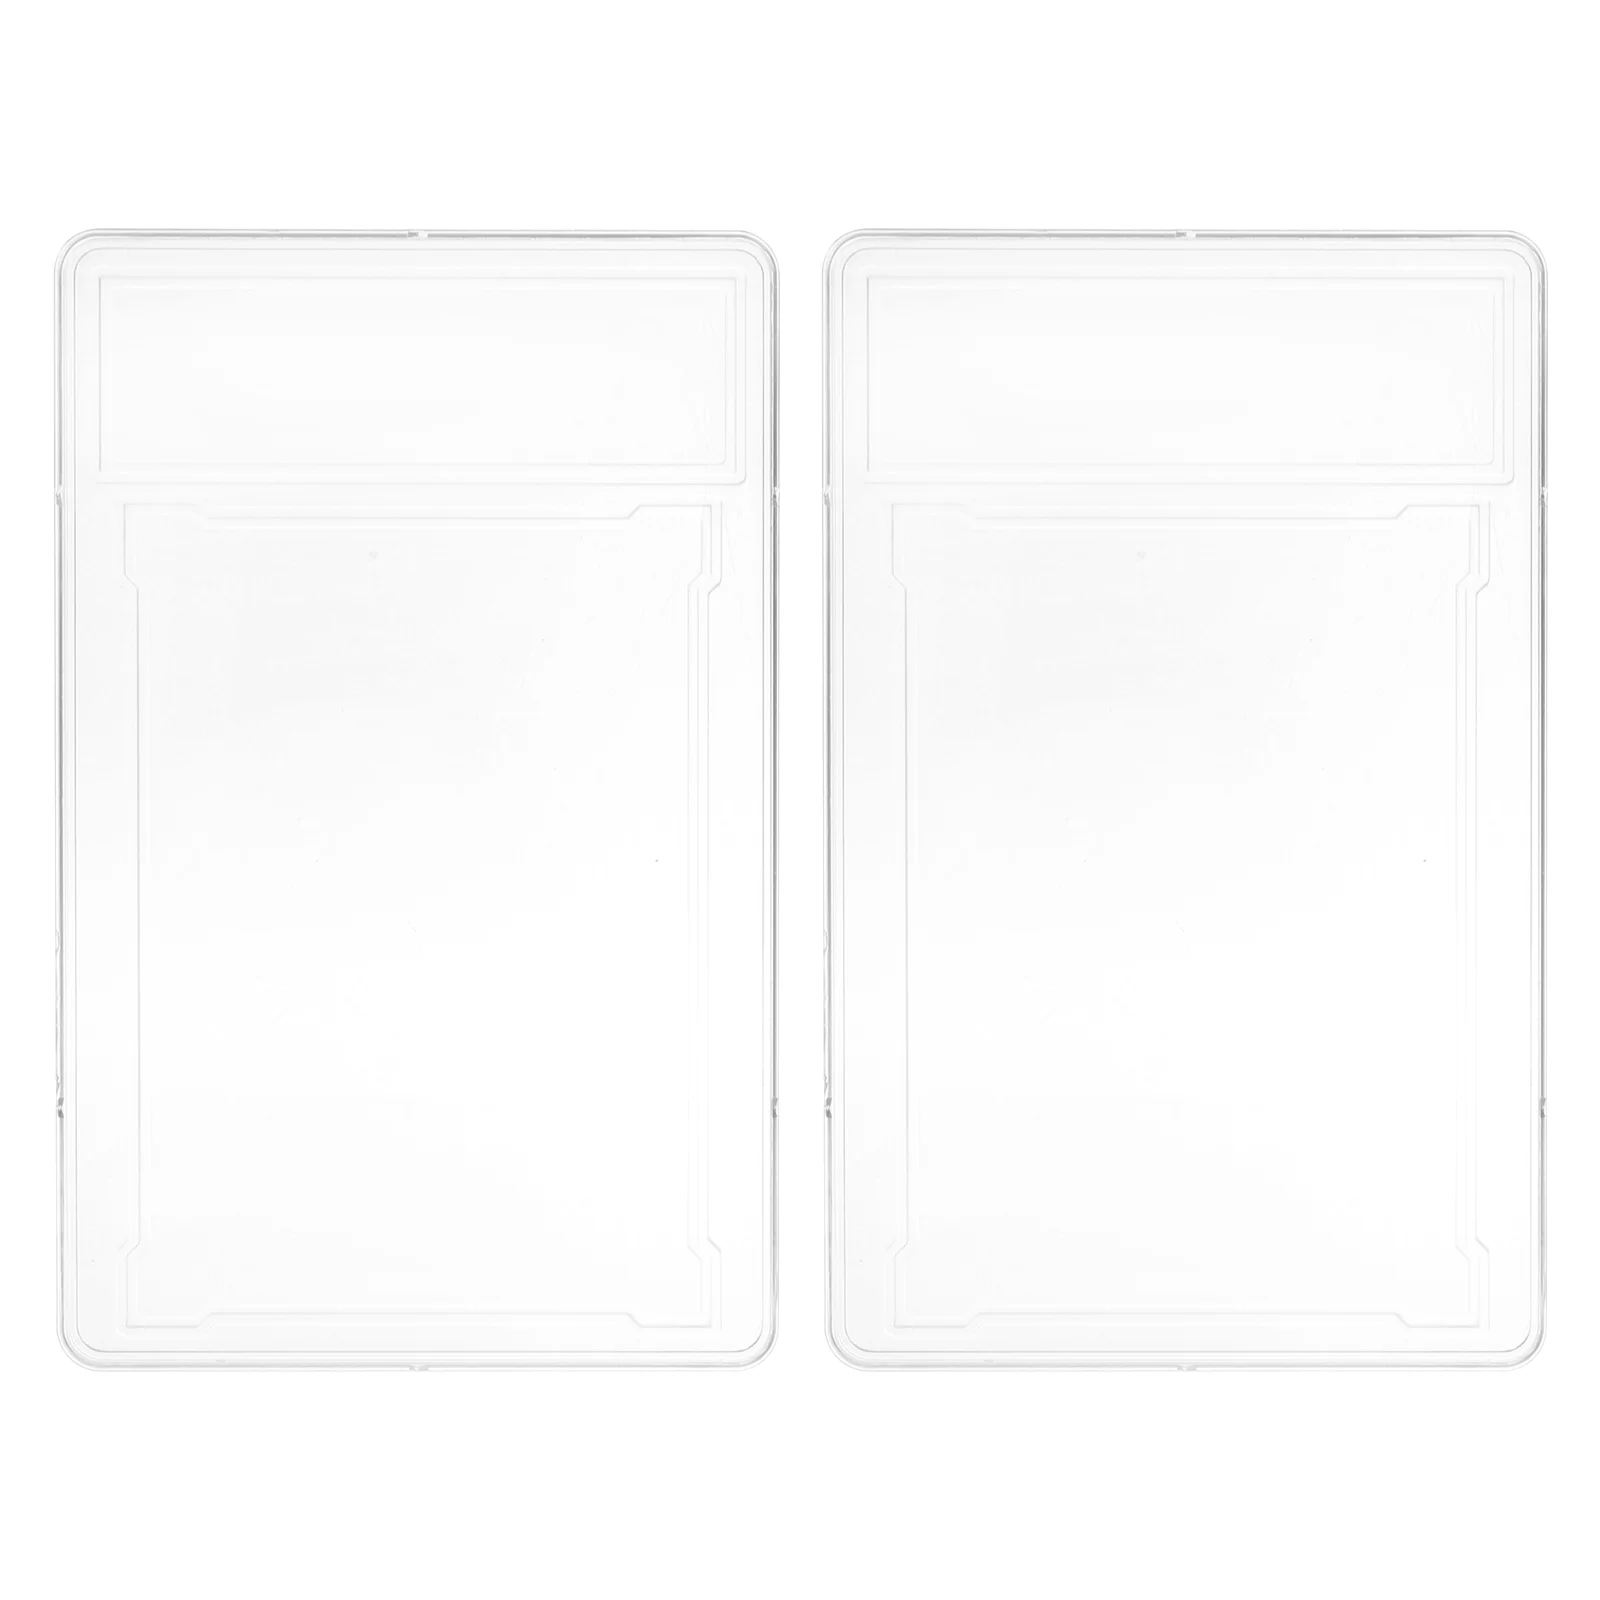 2pcs Clear Game Card Cases Photo Trading Card Protector Cases Game Card Protectors